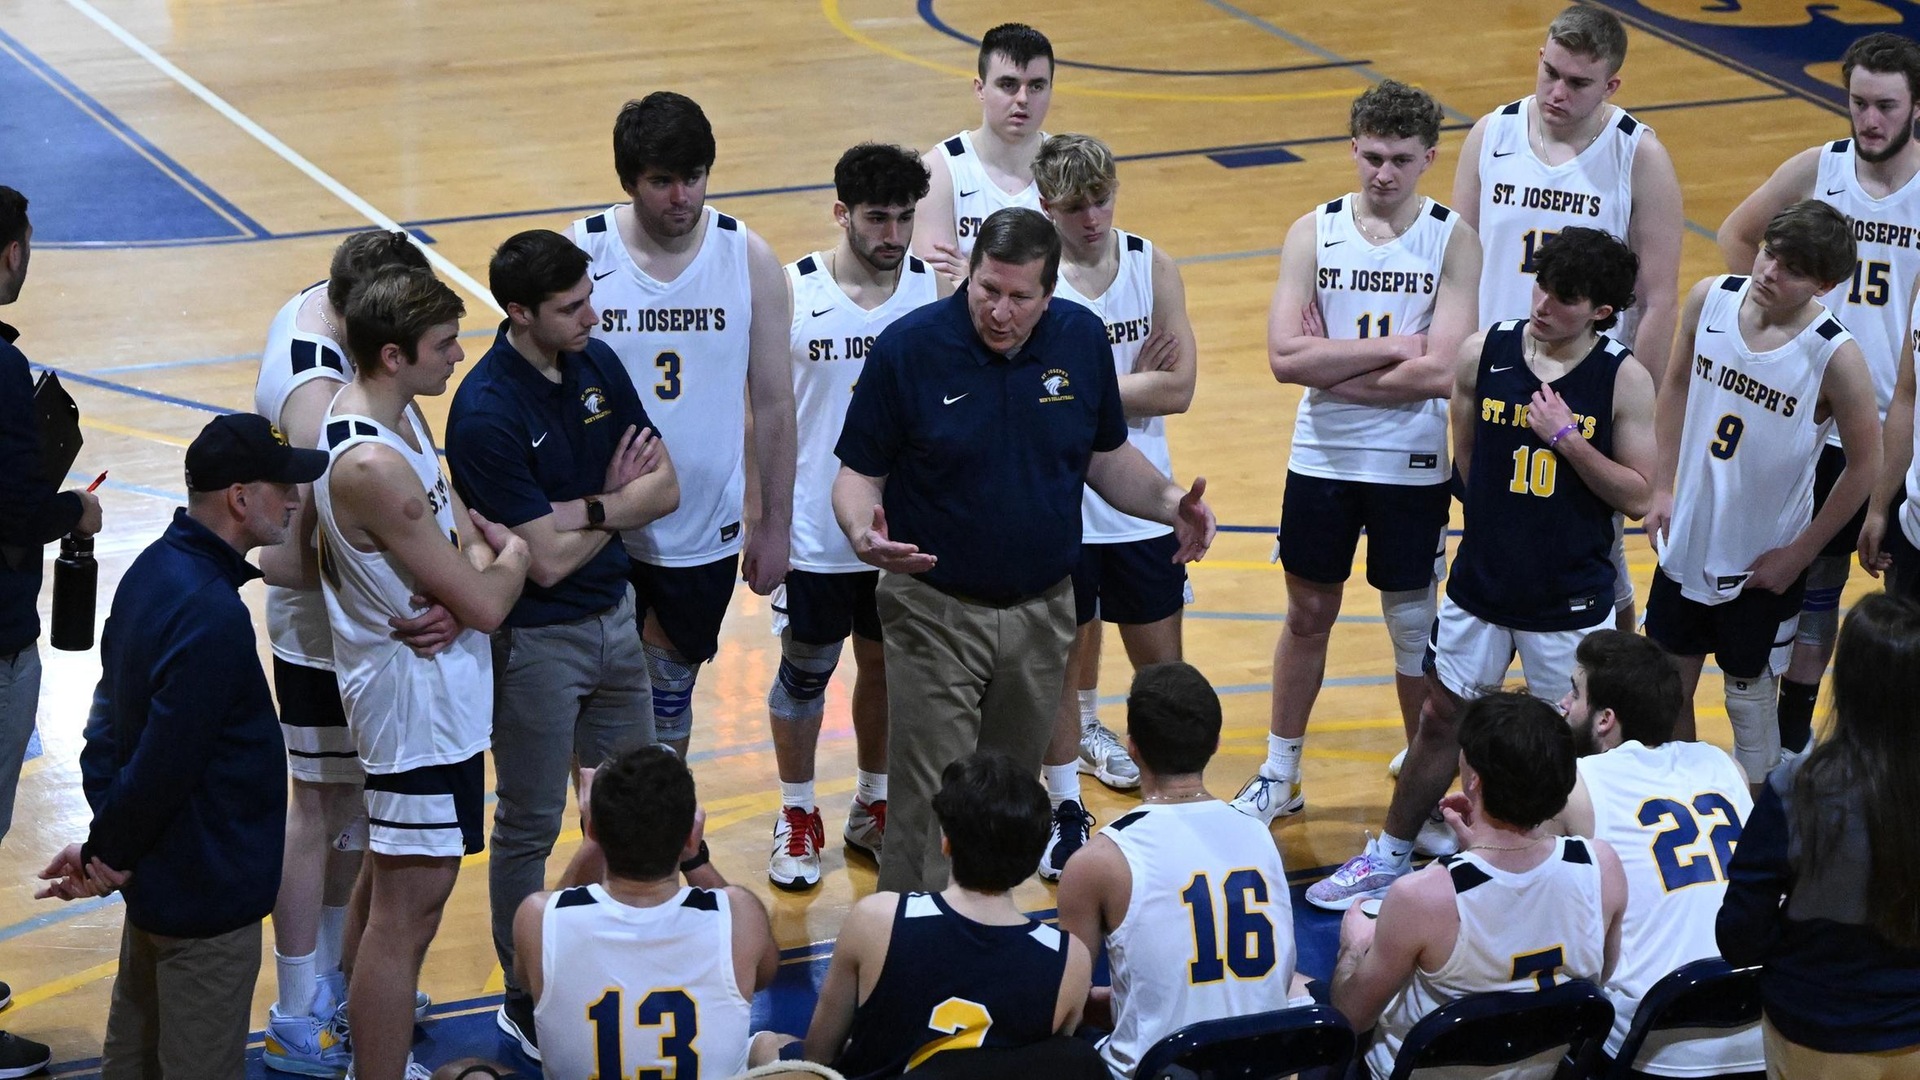 Men's Volleyball Swept By #7 New Paltz